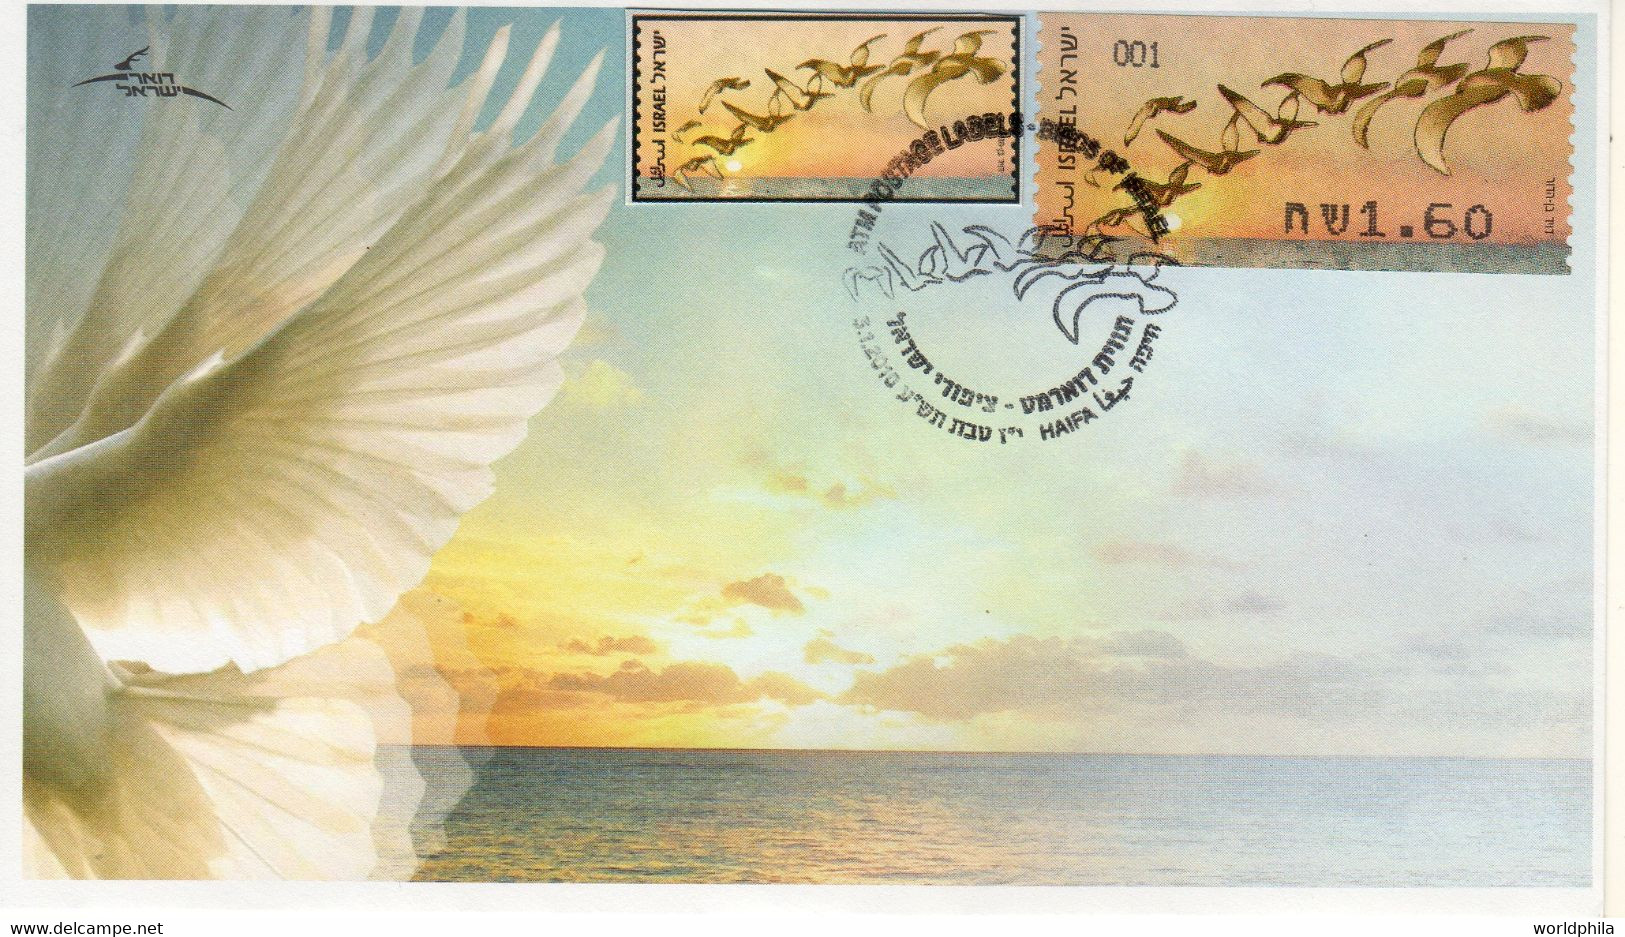 Israel 2010 Extremely Rare, Befall Birds Of Israel, ATM Stamp, Designer Photo Proof, Essay+regular FDC 13 - Imperforates, Proofs & Errors